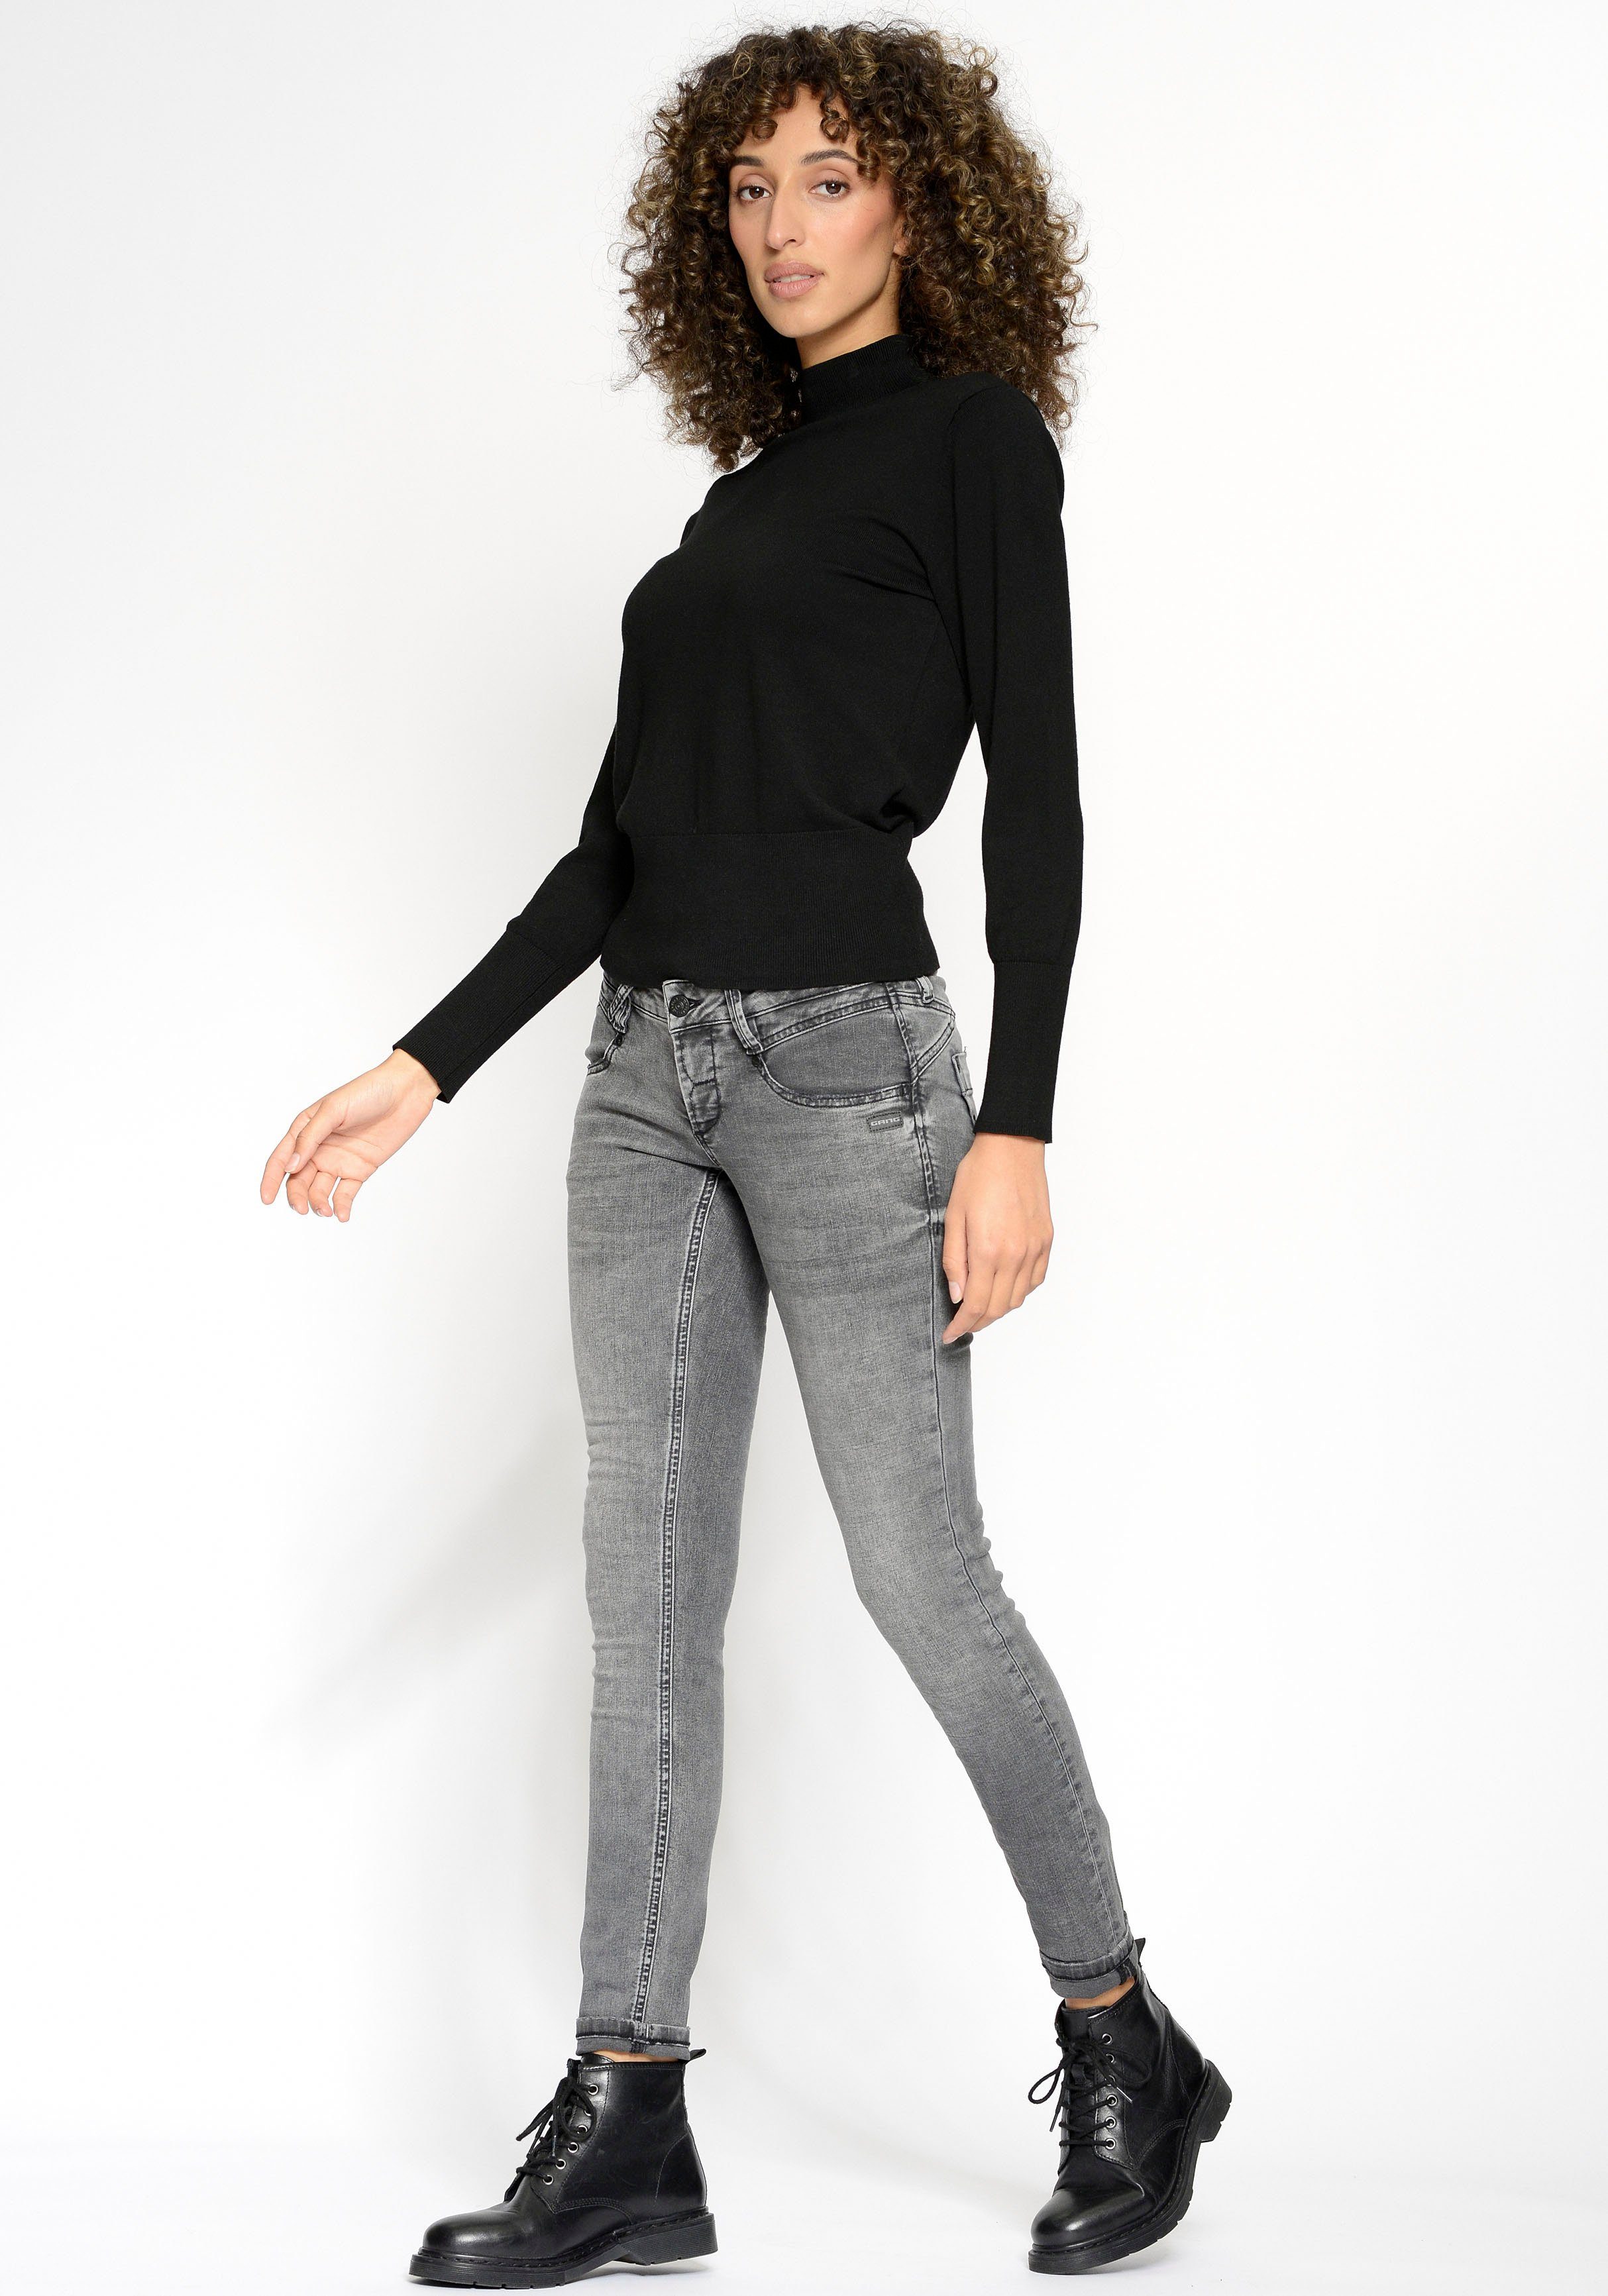 black Used-Waschung Skinny-fit-Jeans GANG authenischer in 94Nena abrasion